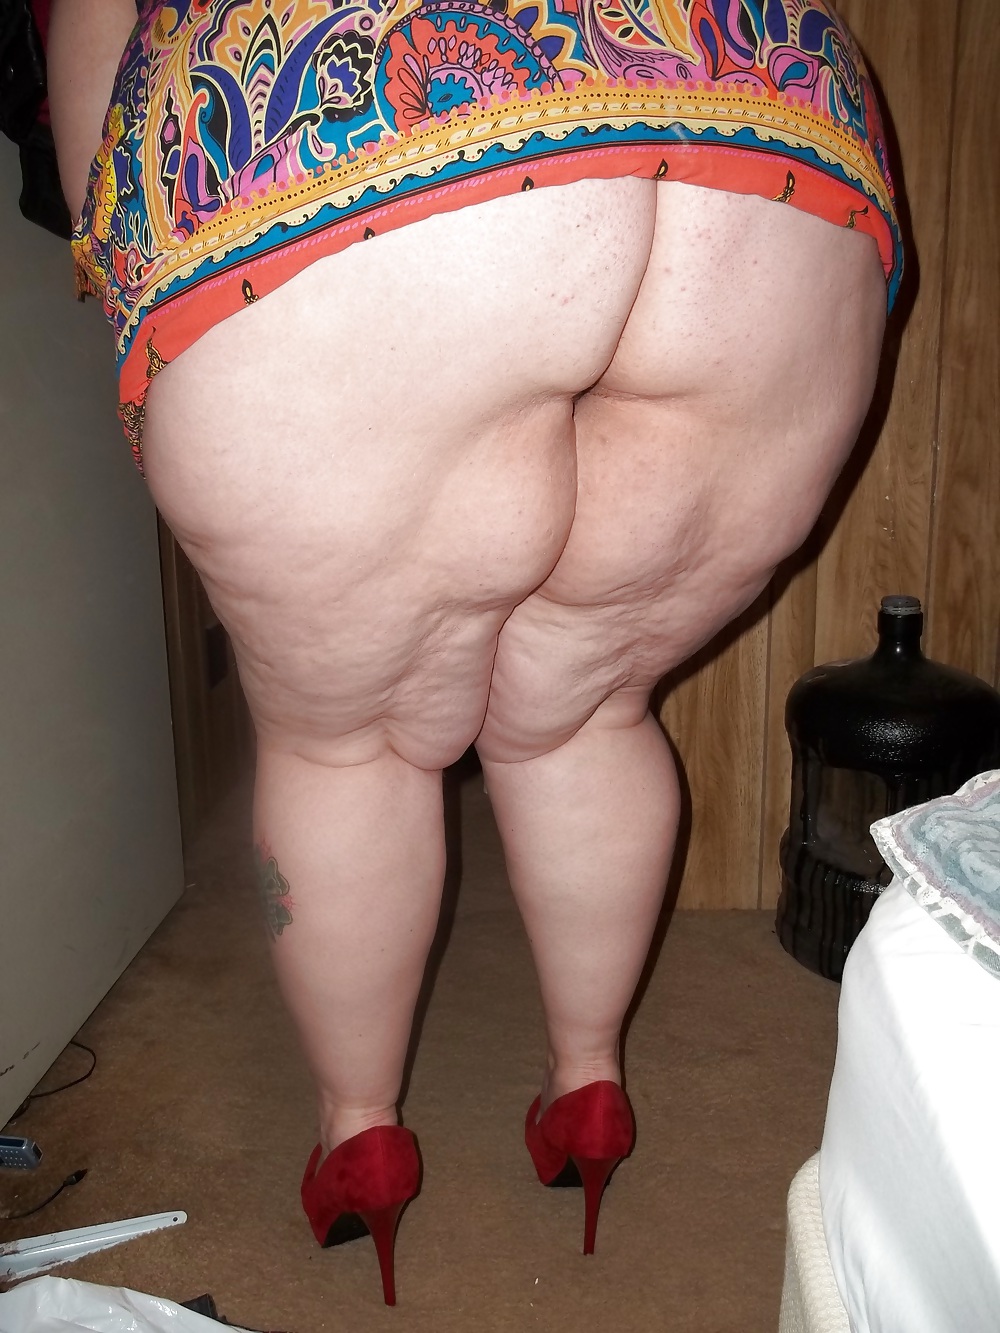 XXX More of my BBW (please leave comments she loves them)